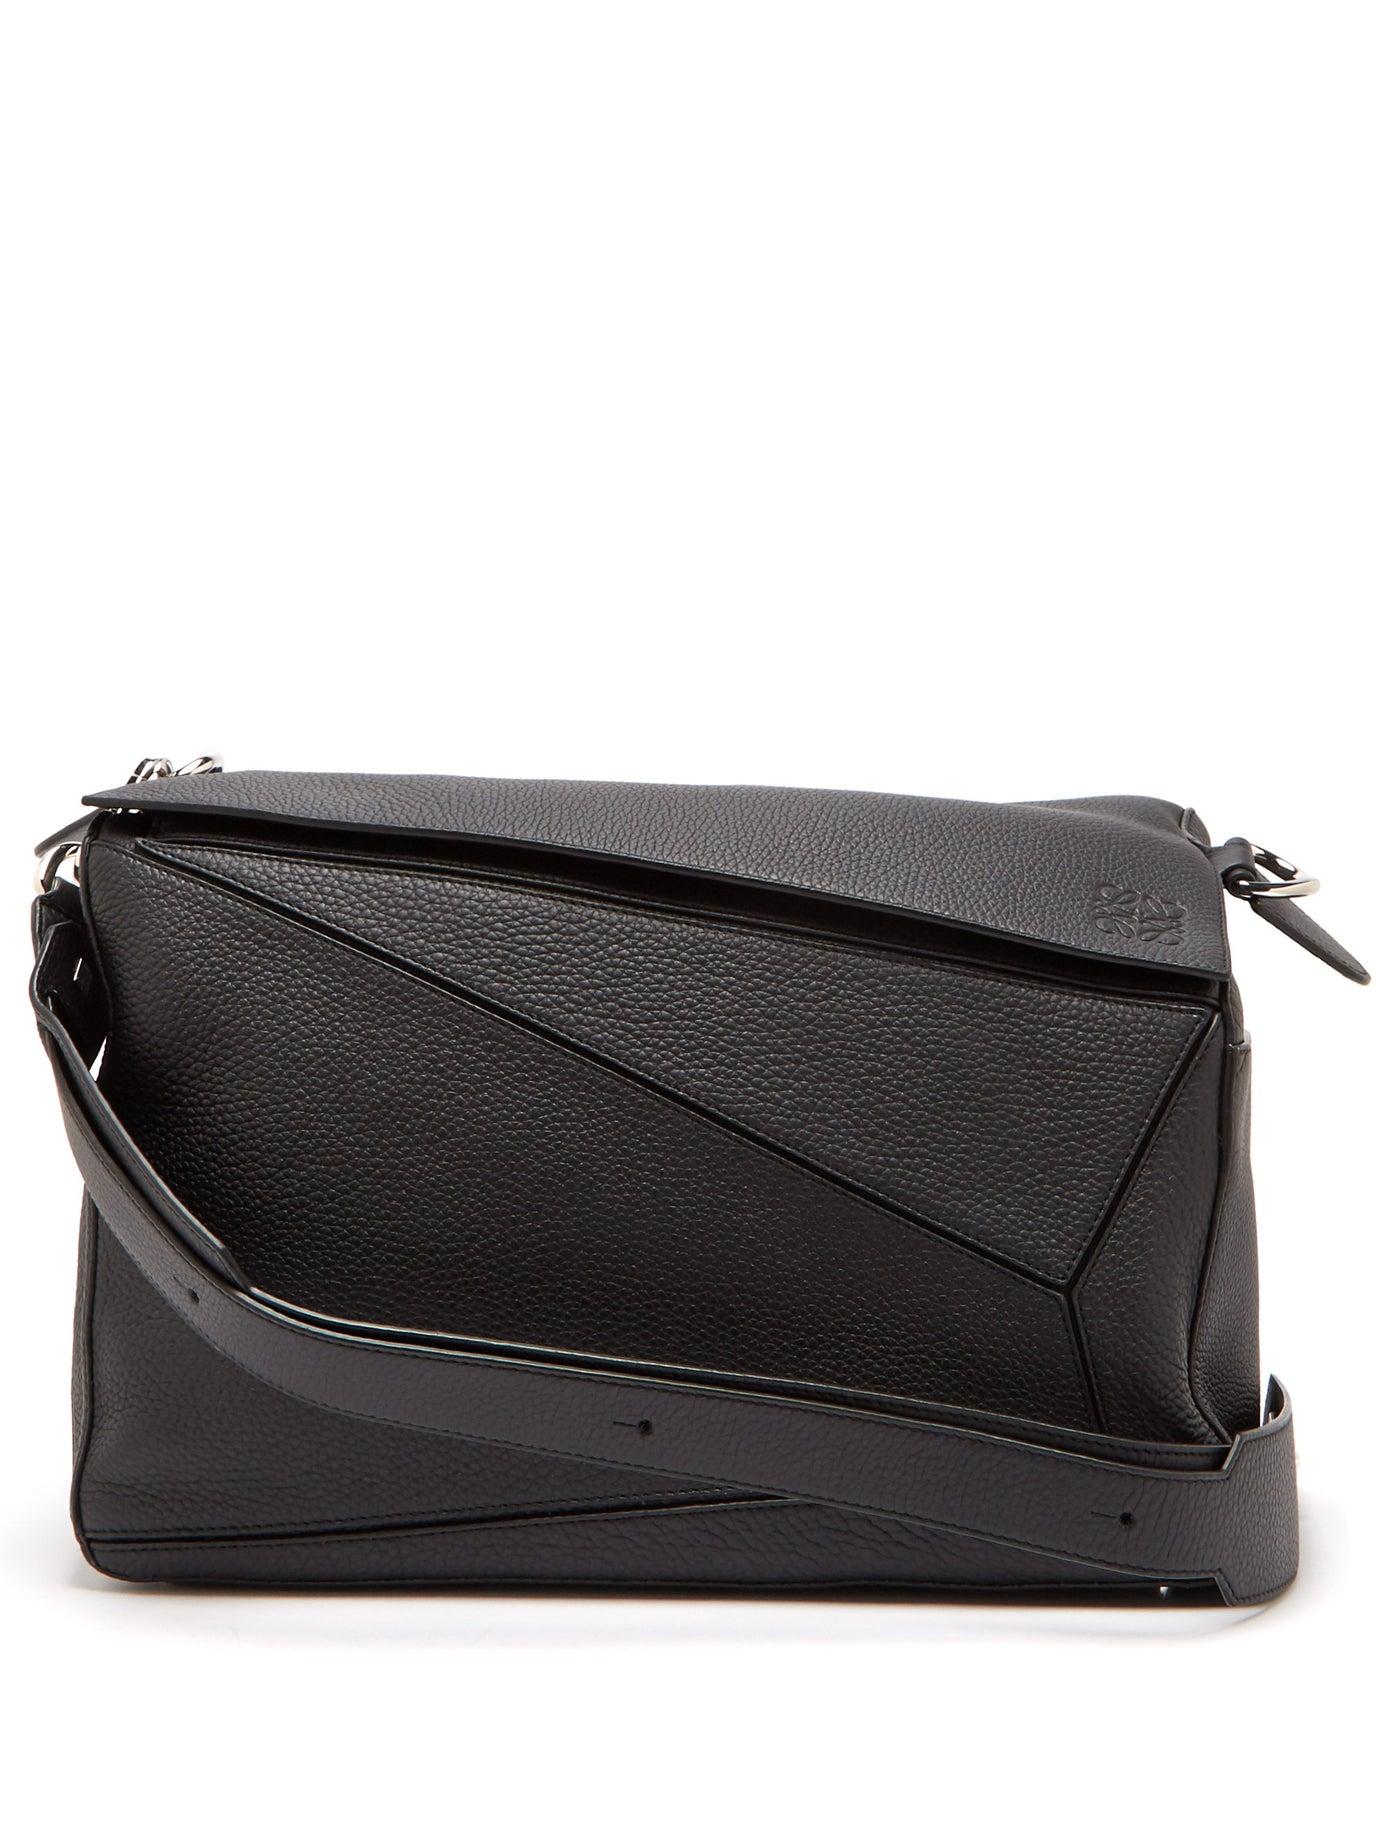 Loewe Puzzle Xl Grained-leather Bag in Black for Men | Lyst